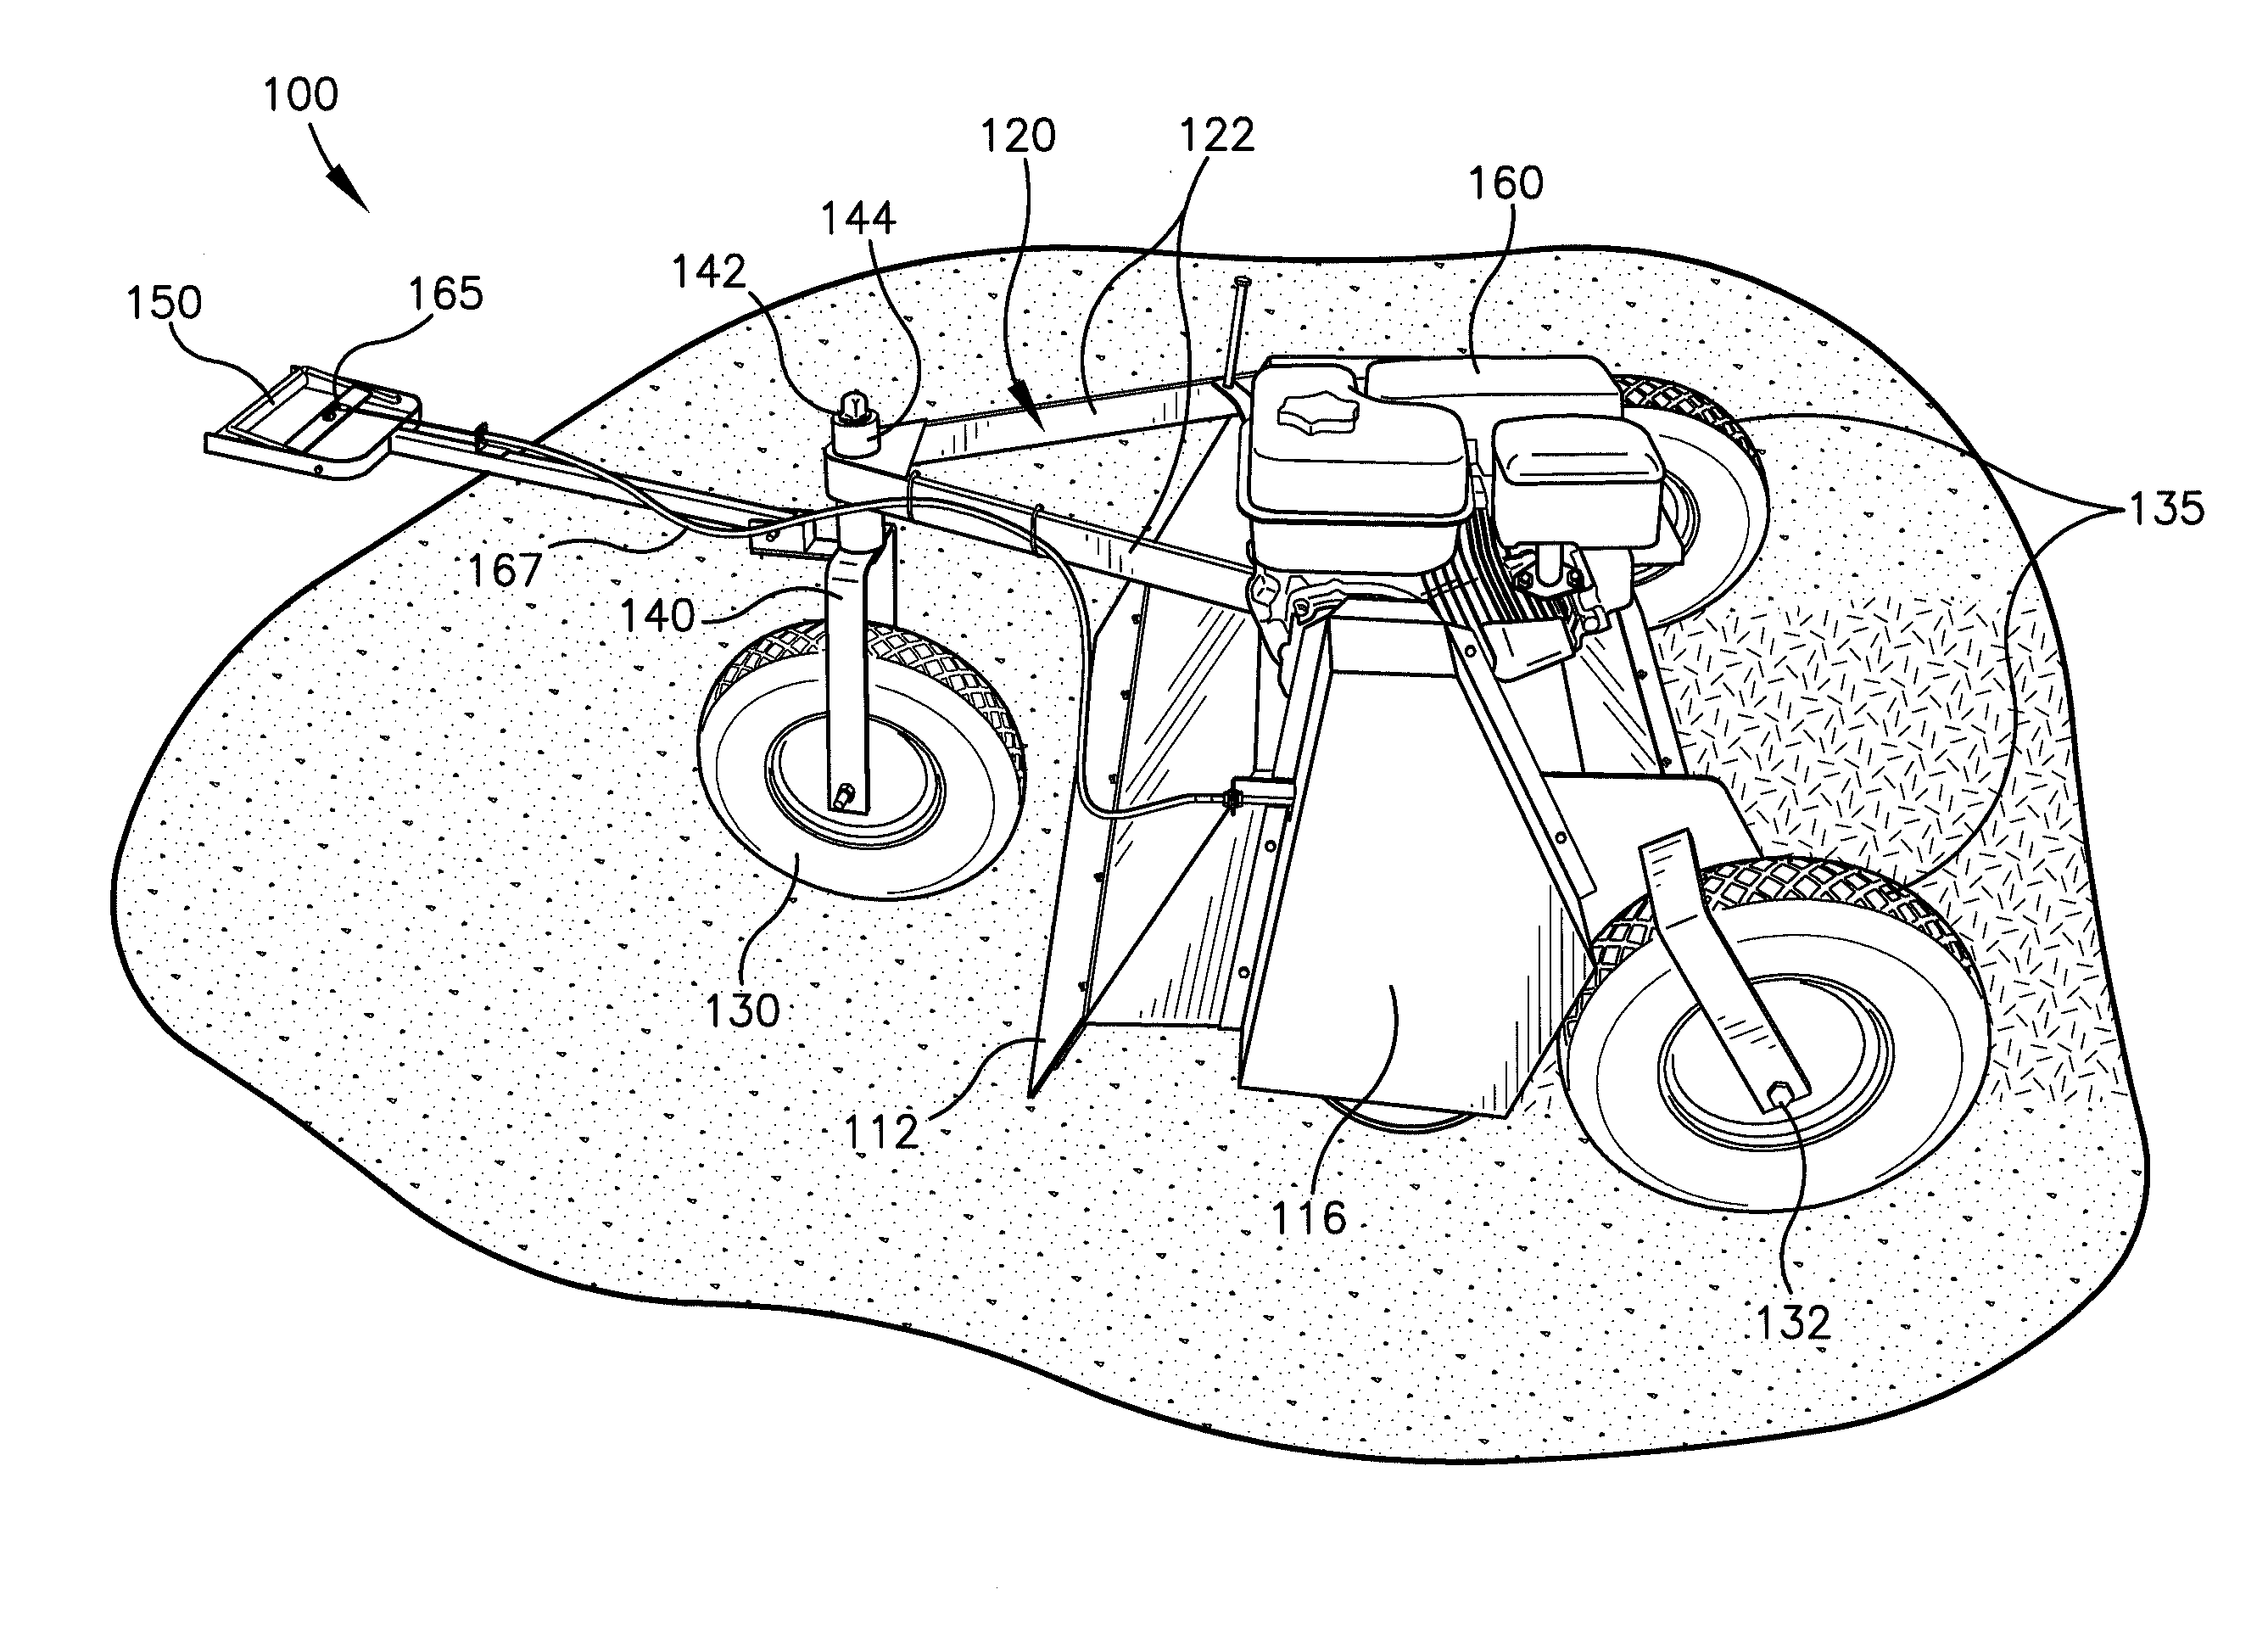 Poultry litter management device and method